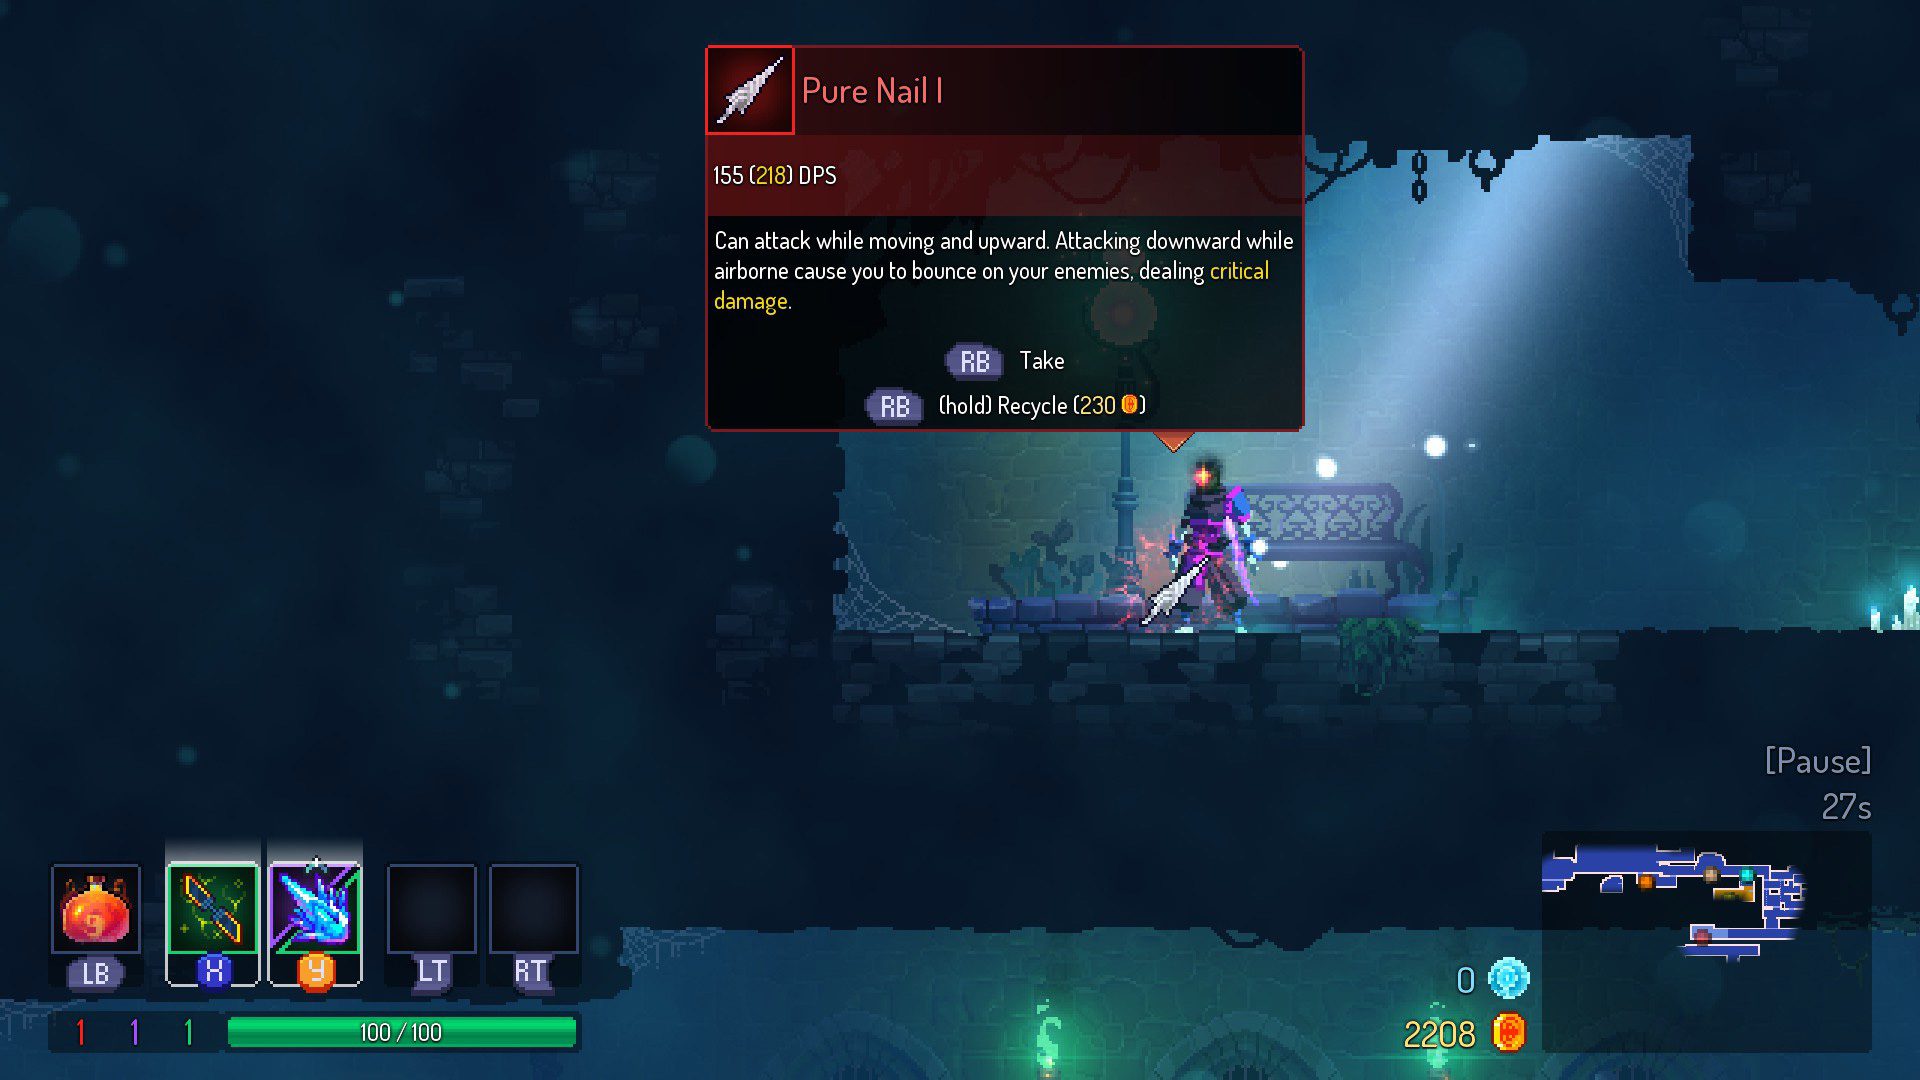 The Pure Nail in Dead Cells